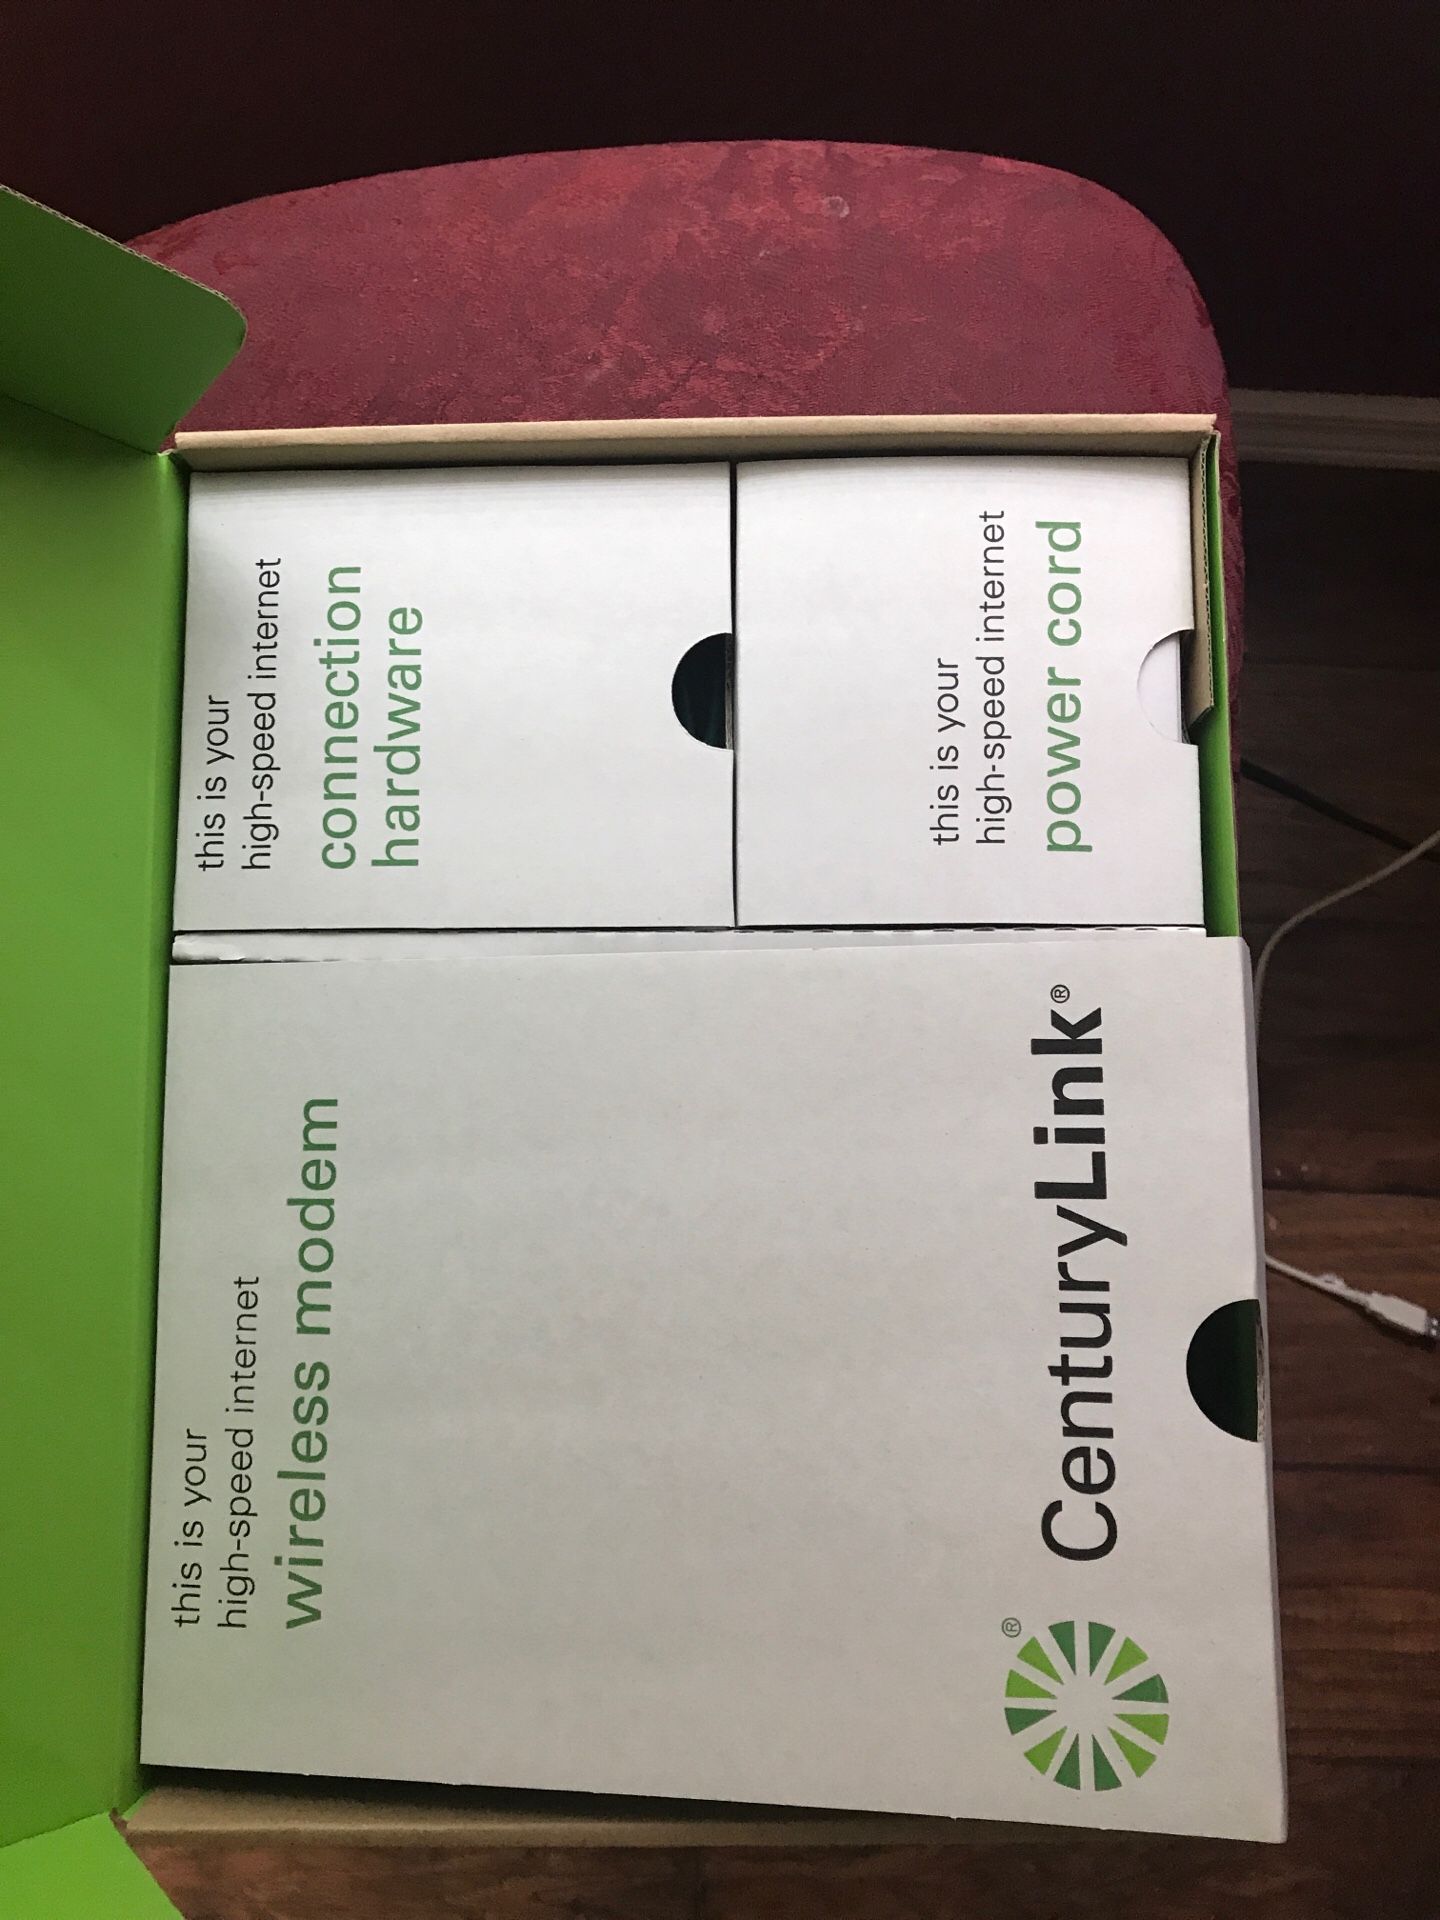 CenturyLink modem and wireless router for High speed DSL C2000T